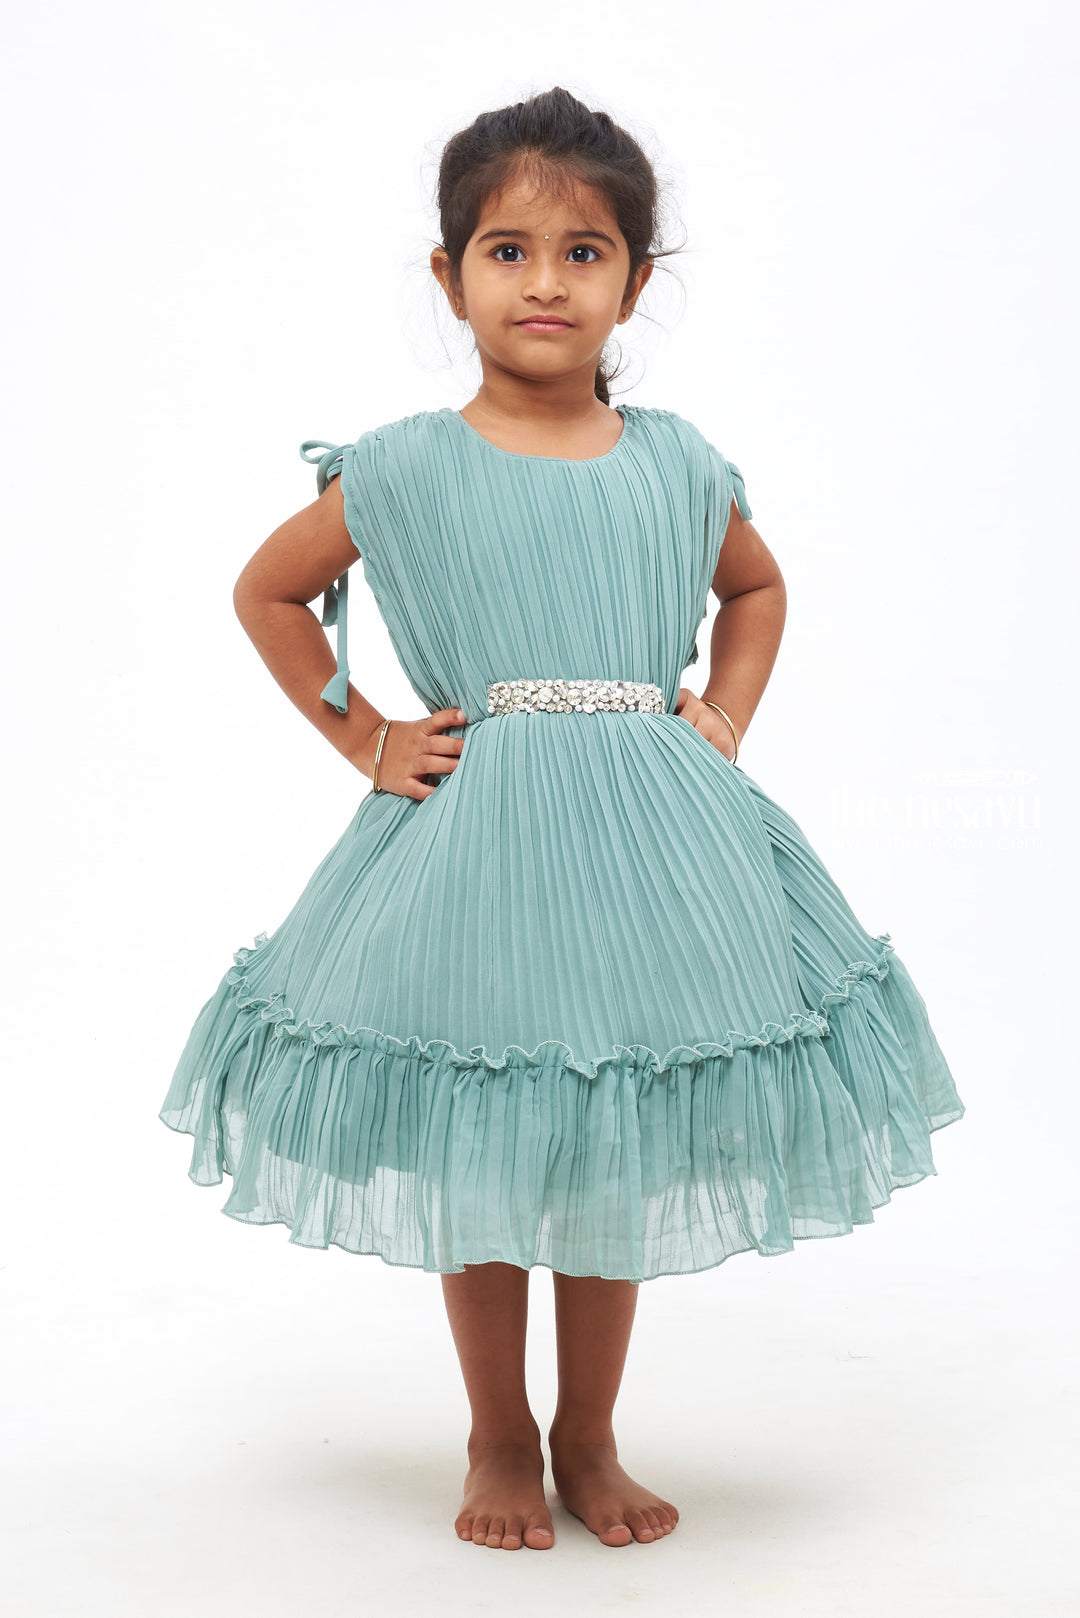 The Nesavu Girls Fancy Party Frock Girls Emerald Green Pleated Georgette Party Dress with Contemporary Poncho Sleeves Nesavu 16 (1Y) / Green / Pleated Georgette PF159C-16 Princess-Inspired Girls Party Dresses | Sparkle and Shine | The Nesavu